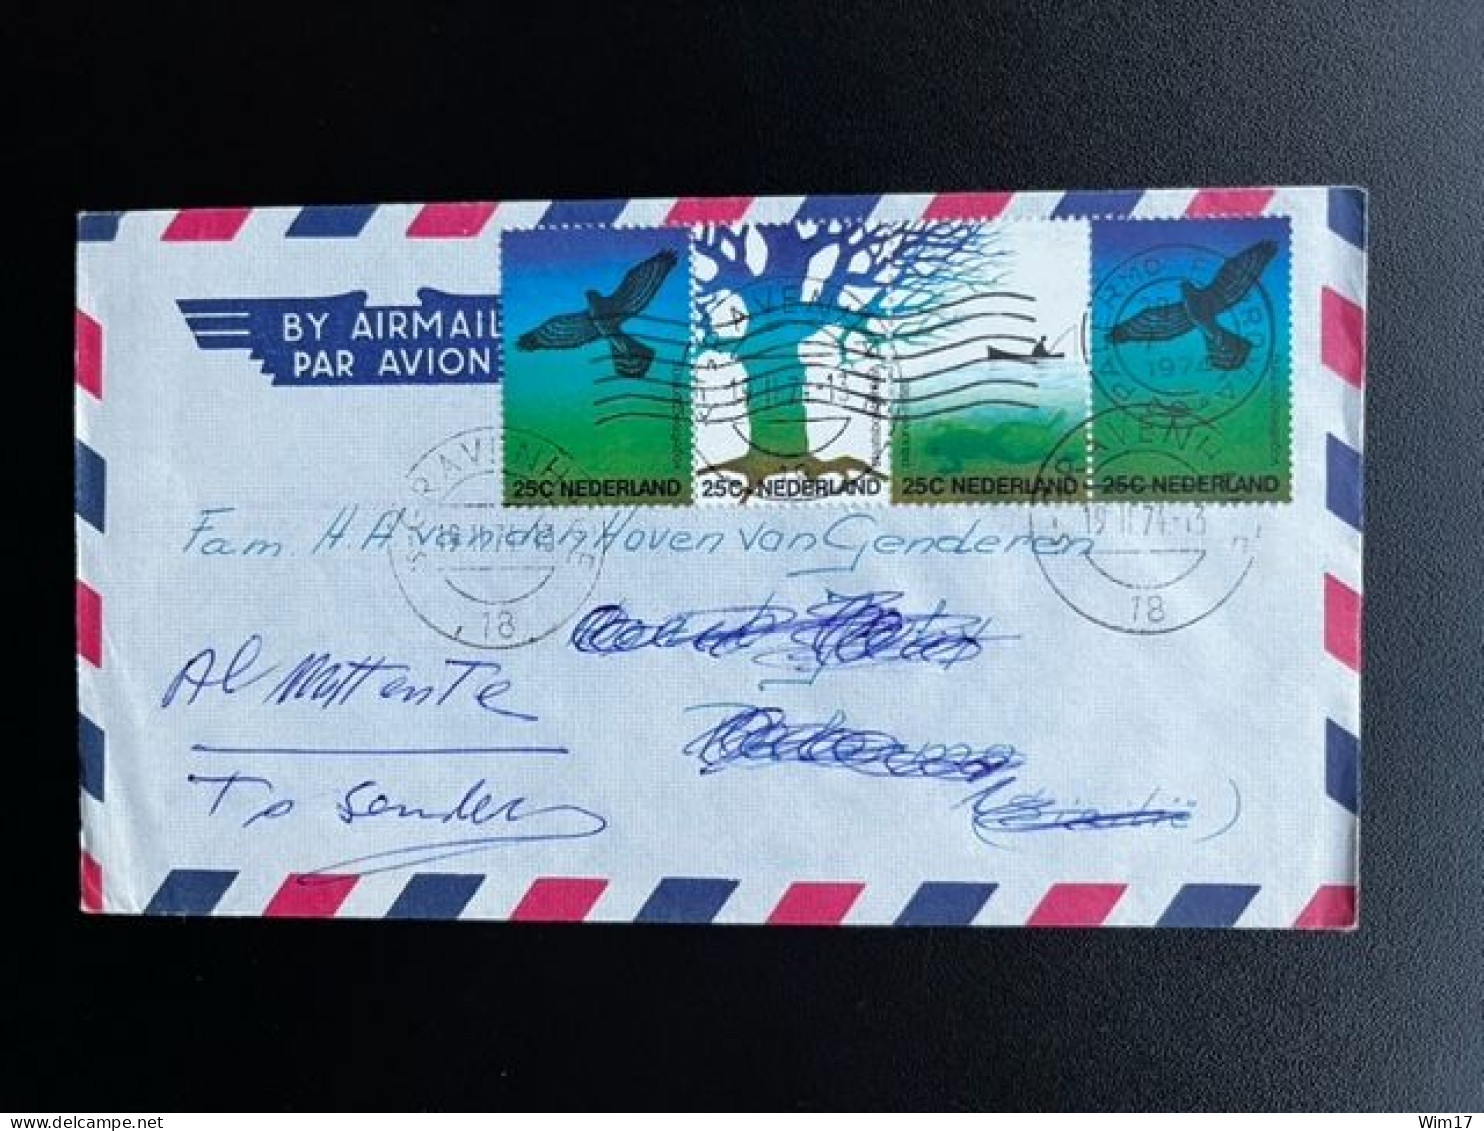 NETHERLANDS 1974 AIR MAIL LETTER 'S GRAVENHAGE TO ITALY 19-02-1974 NEDERLAND RETURN TO SENDER - Covers & Documents